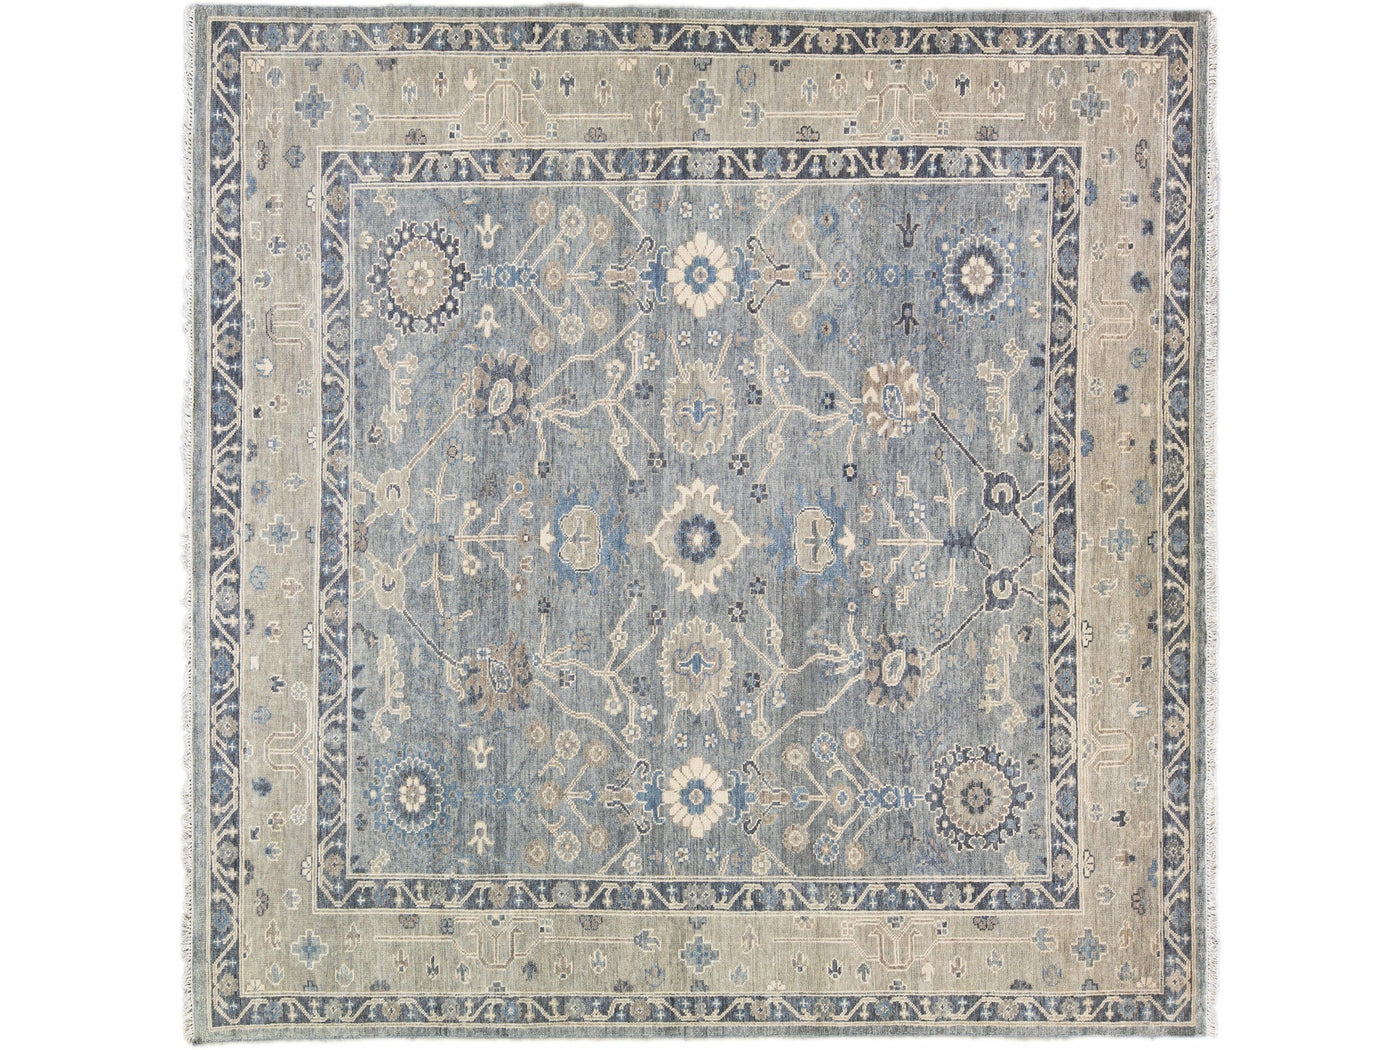 Modern Gray and Tan Oushak Style Handmade Floral Motif Square Wool Rug